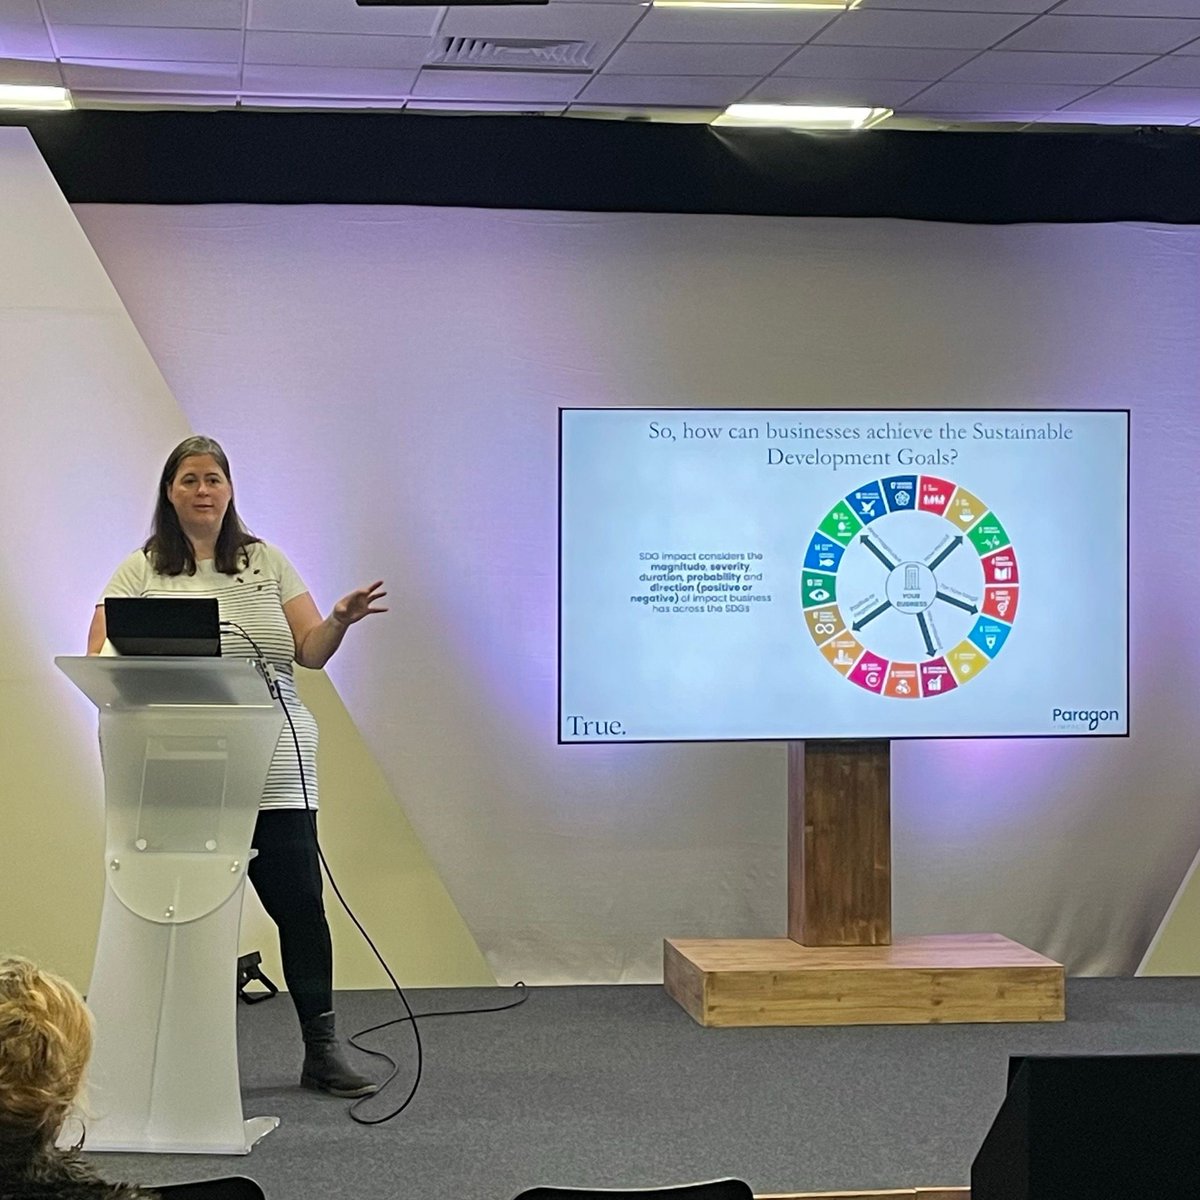 Today #ecoactive business members were invited to a training session from Jersey Association of Sustainability Practitioners on how businesses can align to the @UN Sustainable Development Goals. Find out more about the #SDGs here👉 sdgs.un.org/goals @sdgaction